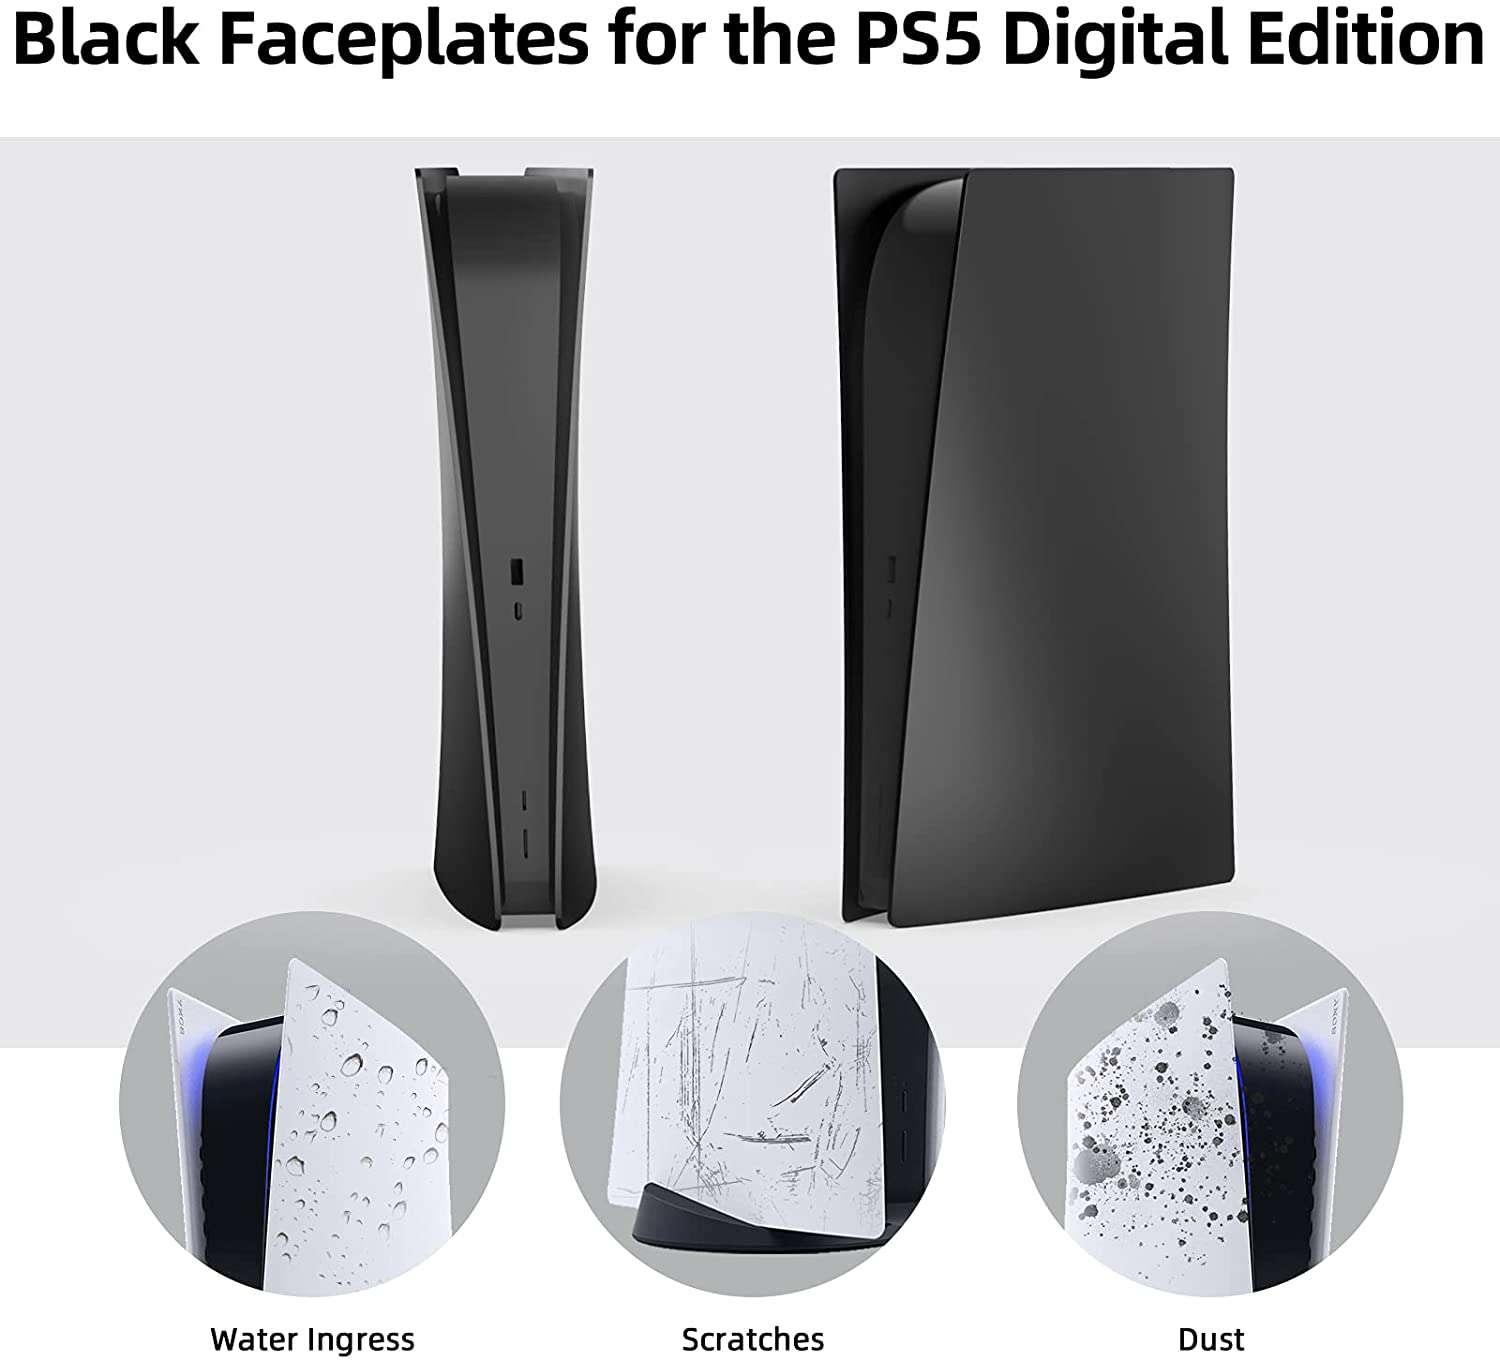 Black faceplates on PS5 resist water, scratches, and dust better than original ones.